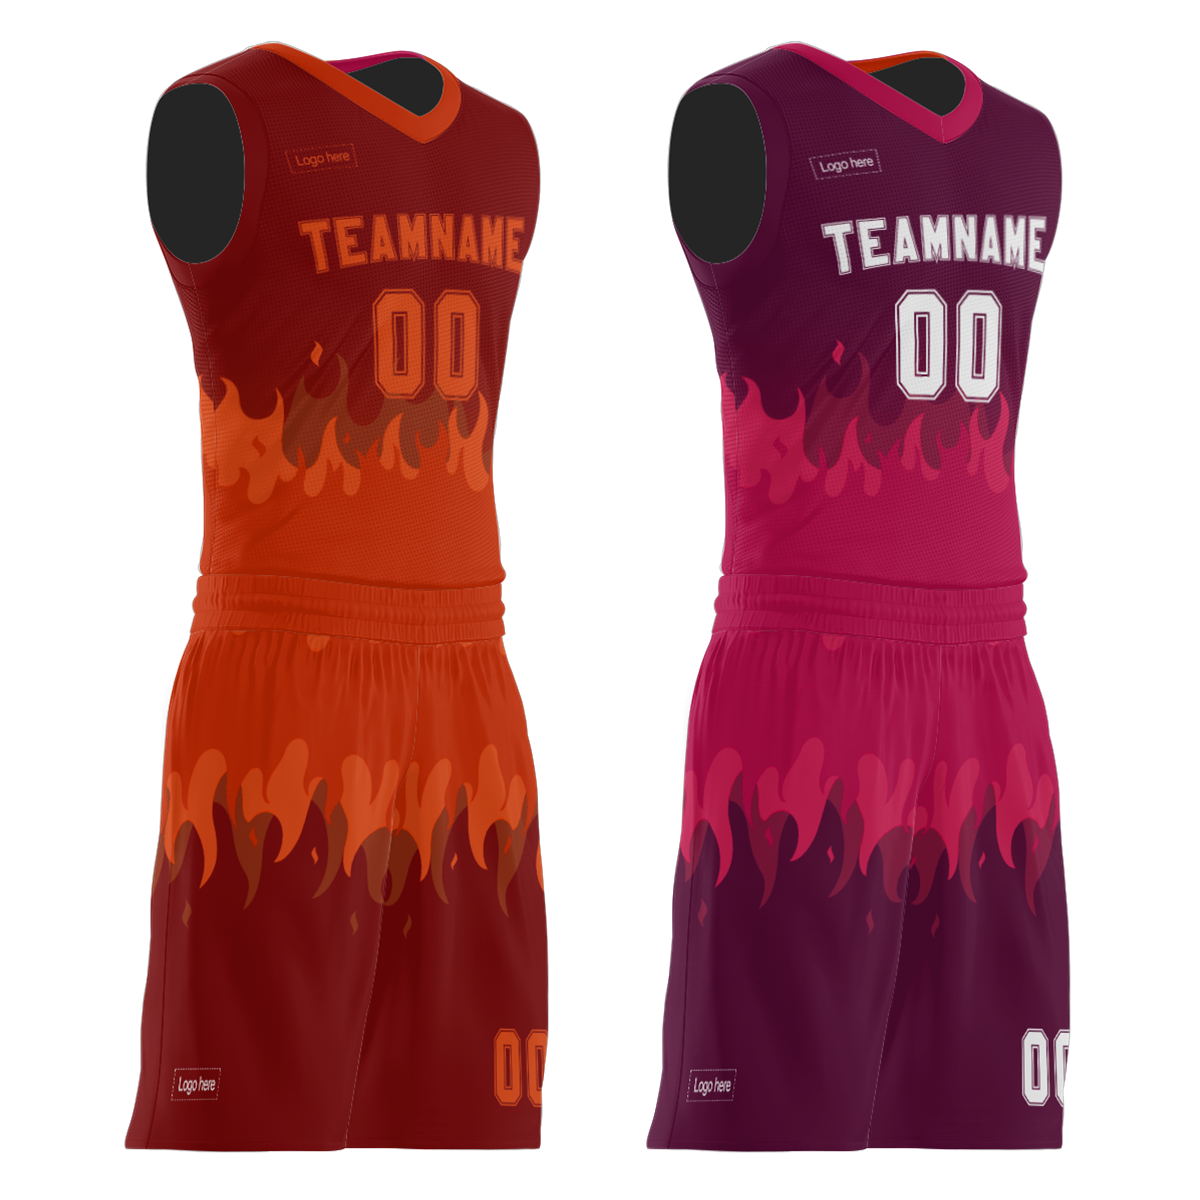 Wholesale New Blank Team Basketball Jerseys Printing Design Your Own Reversible Basketball Uniforms for Men and Women